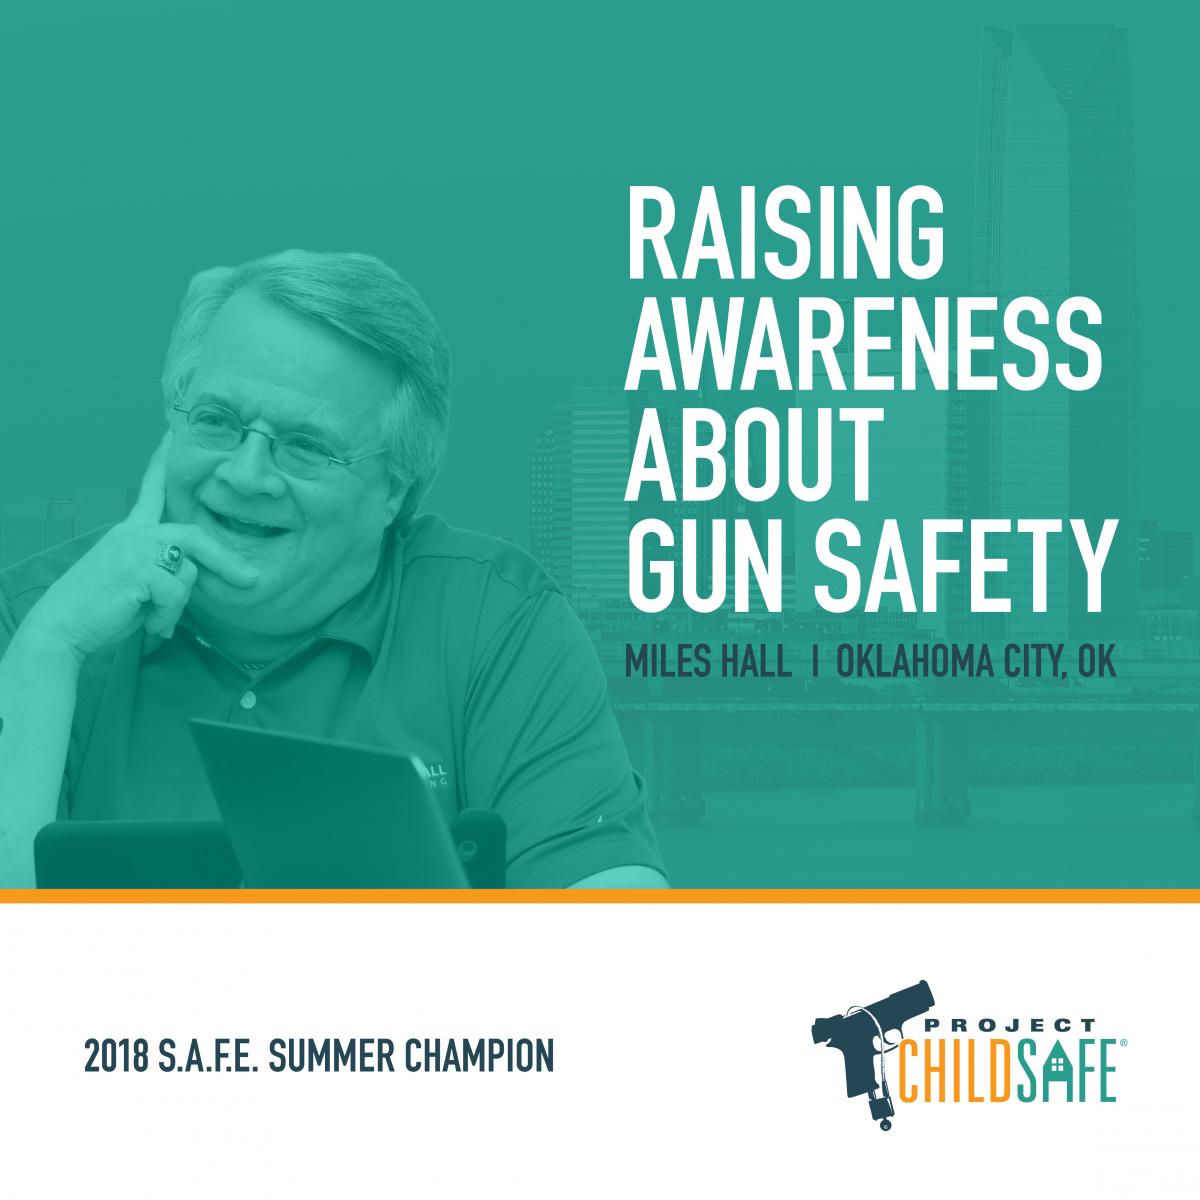 PROJECT CHILDSAFE RECOGNIZES MILES HALL AS S.A.F.E. SUMMER CHAMPION FOR LOCAL FIREARMS SAFETY ADVOCACY IN OKLAHOMA CITY